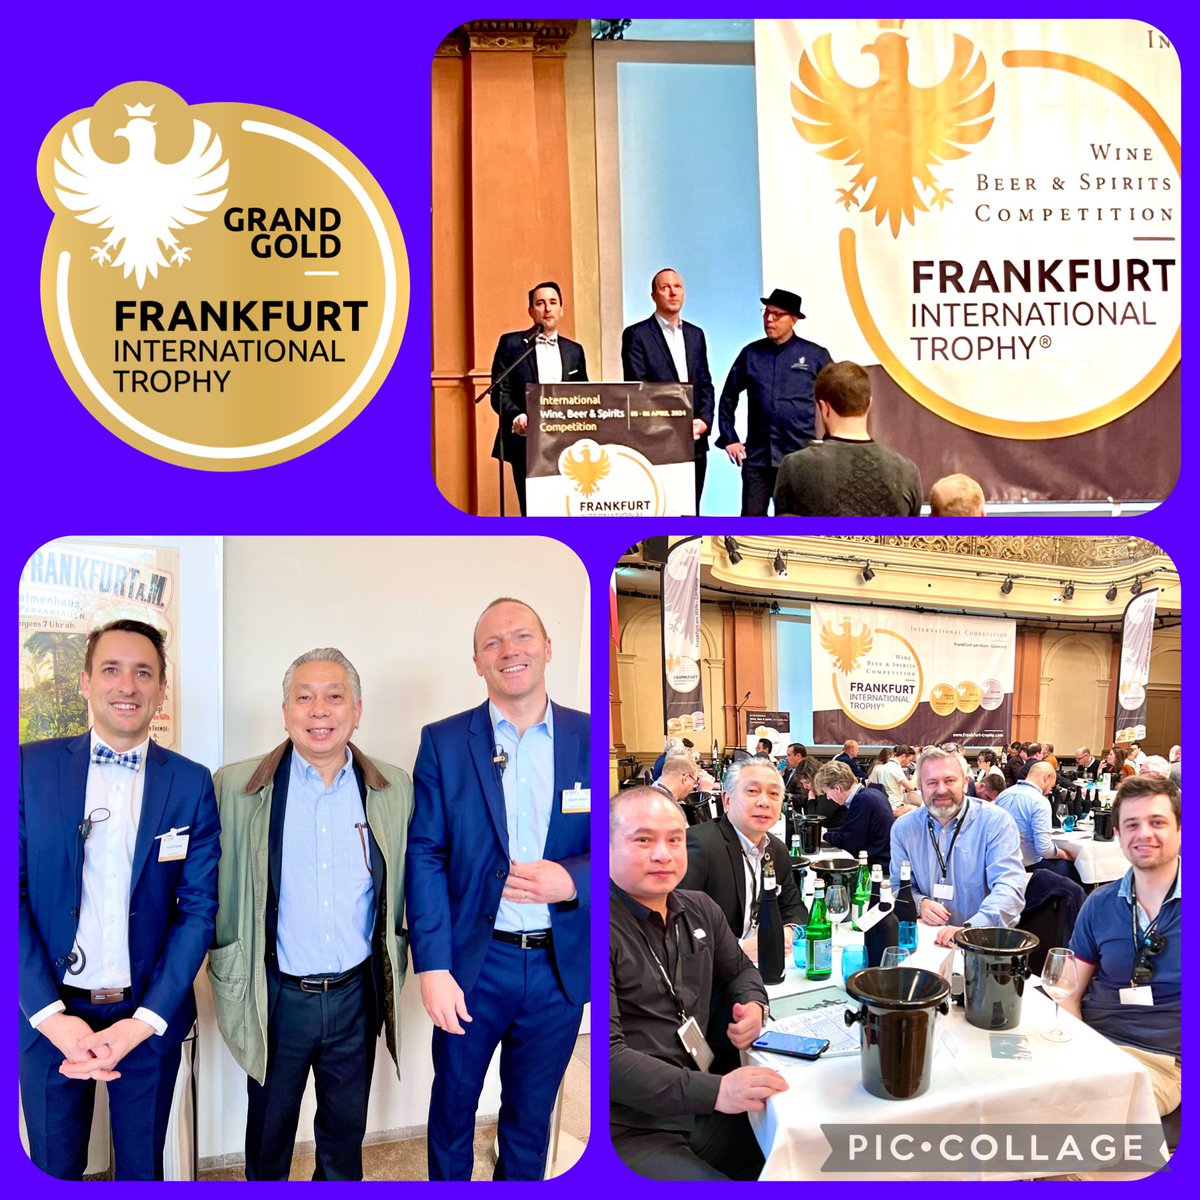 All these people participate in this international competition makes it Grand Gold concours!💮

#frankfurtinternationaltrophy #frankfurtinternational #frankfurtwinetrophy
#wsetspiritseducator #awamorijinbner #internationaldrinksspecialists #wsetwineeducator